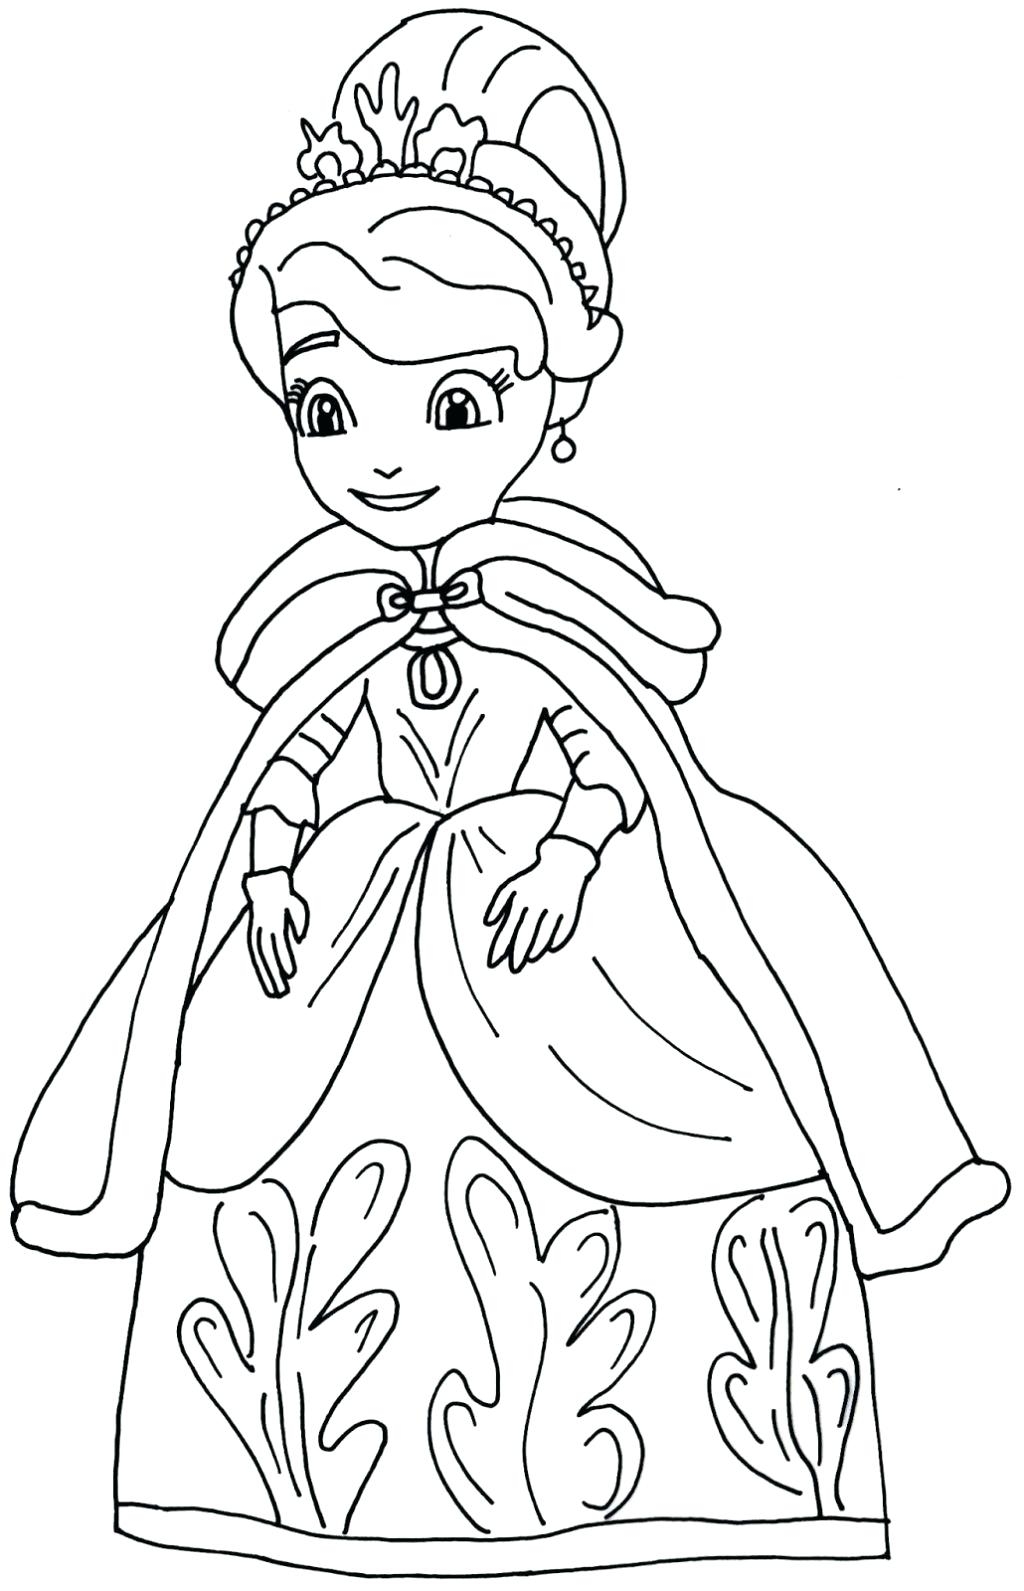 Sofia Coloring Pages To Print at GetColorings.com | Free printable